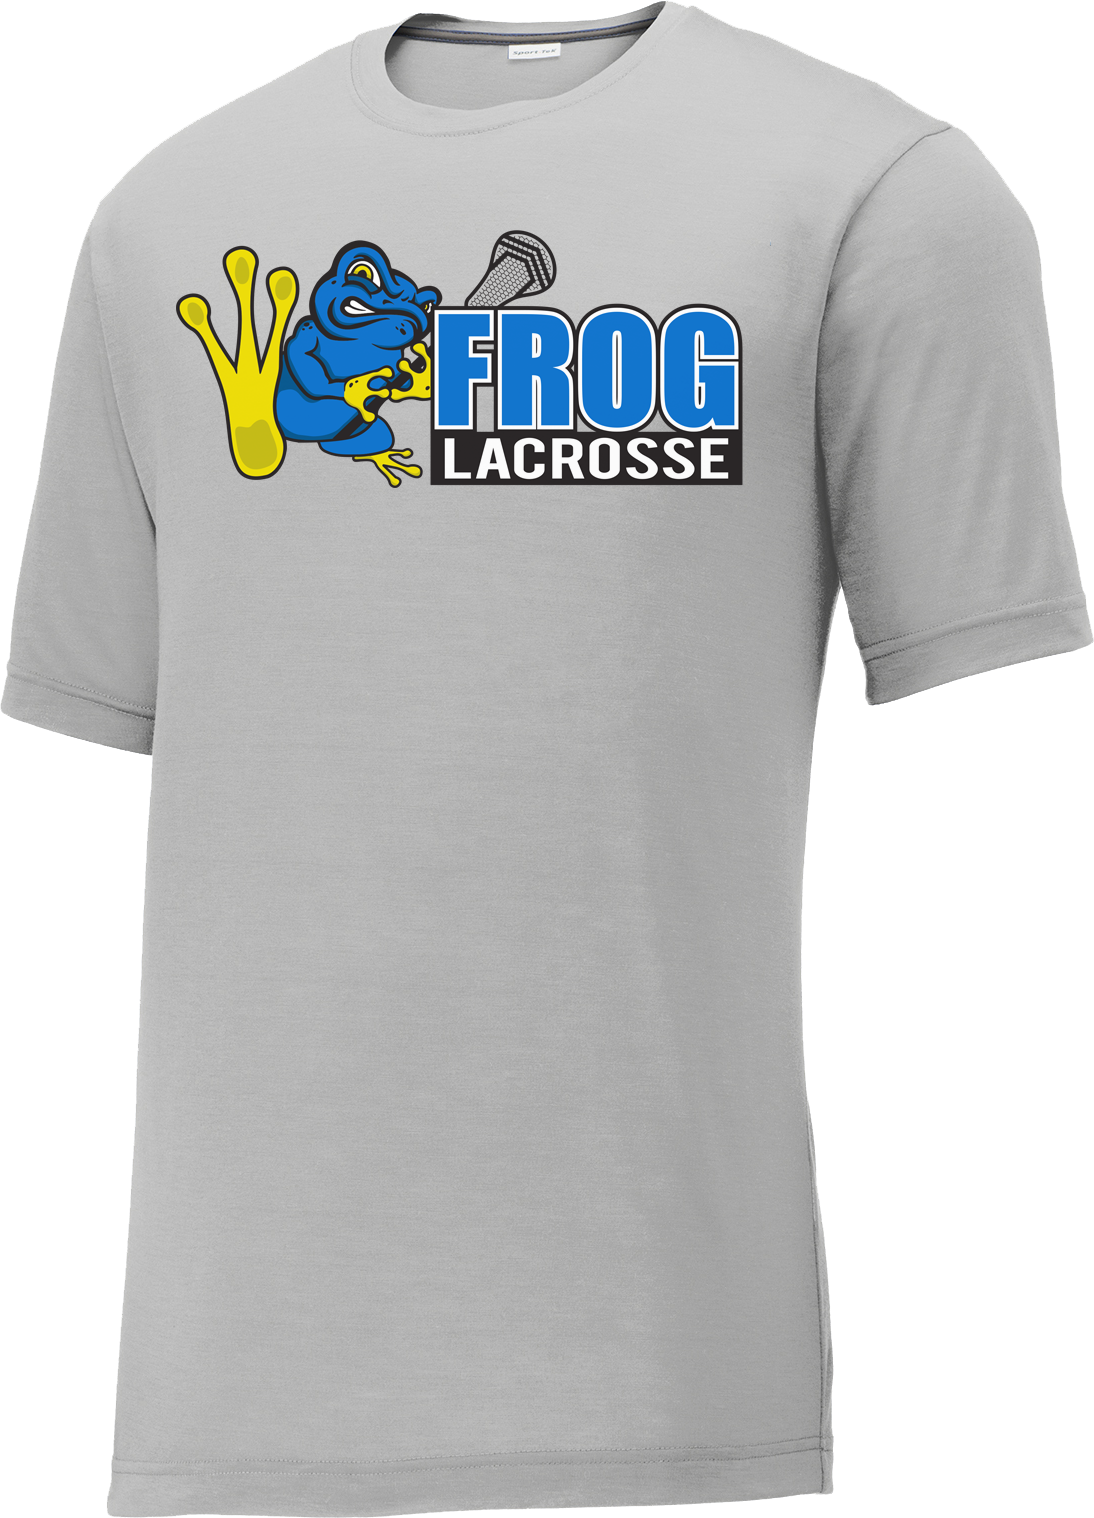 Frog Lacrosse Silver CottonTouch Performance T-Shirt